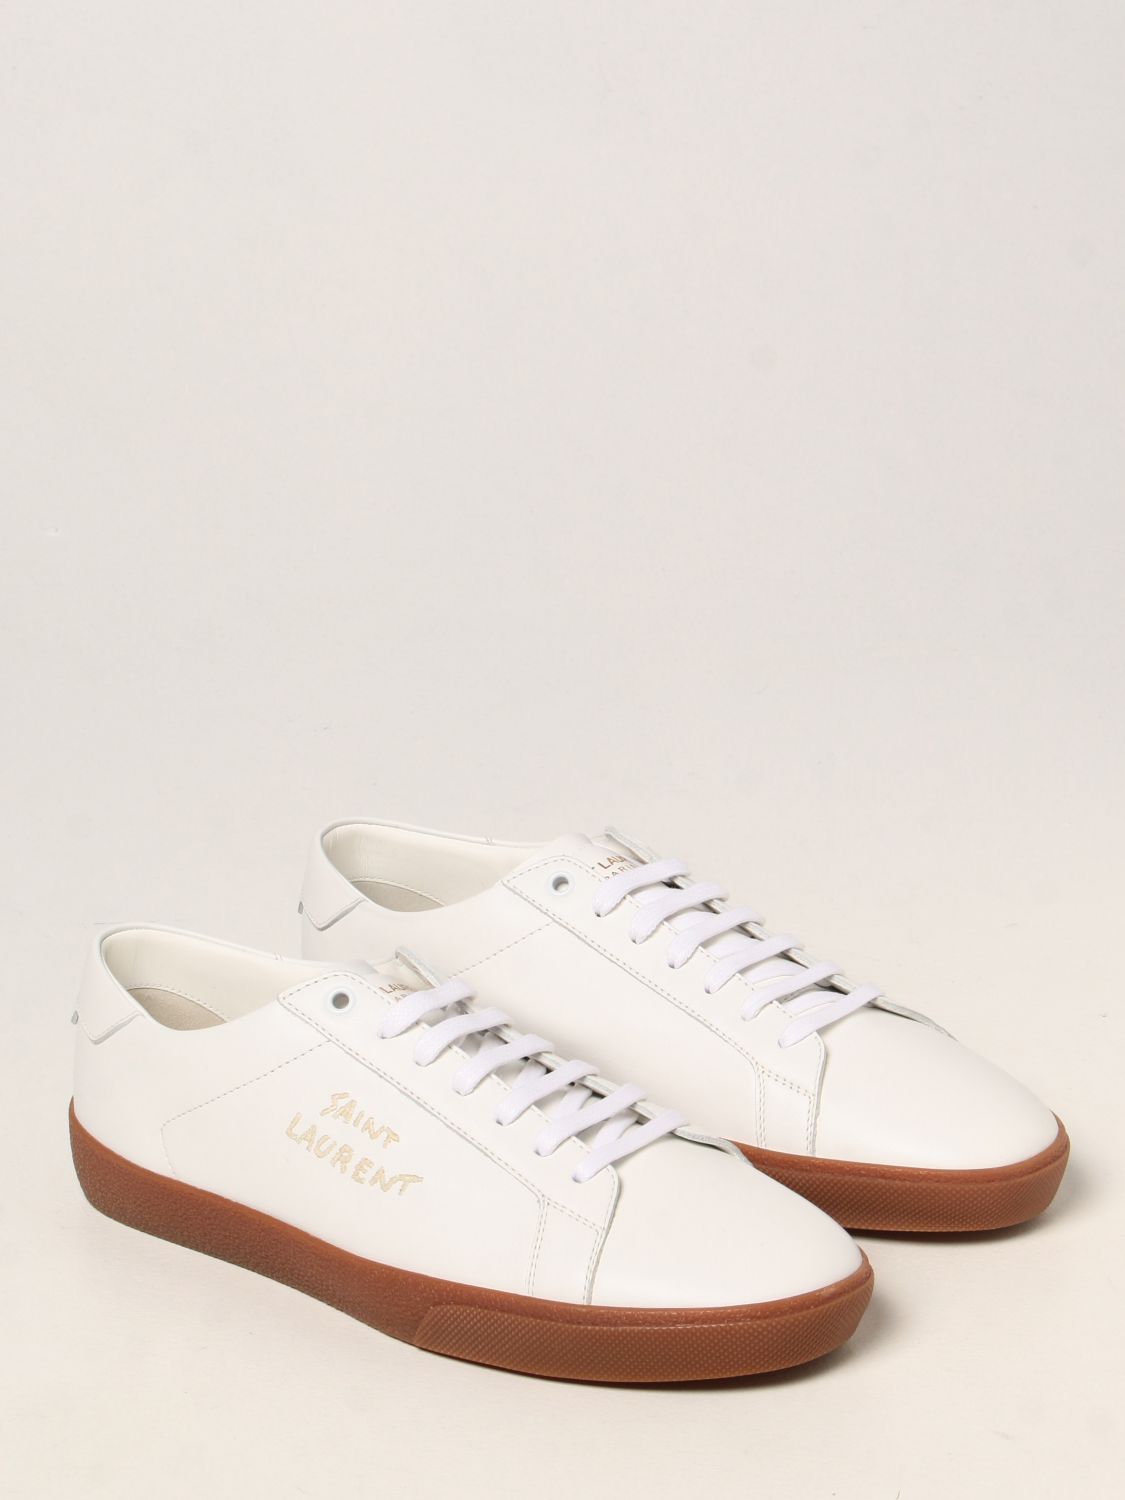 Court Classic SL06 Saint Laurent sneakers in leather